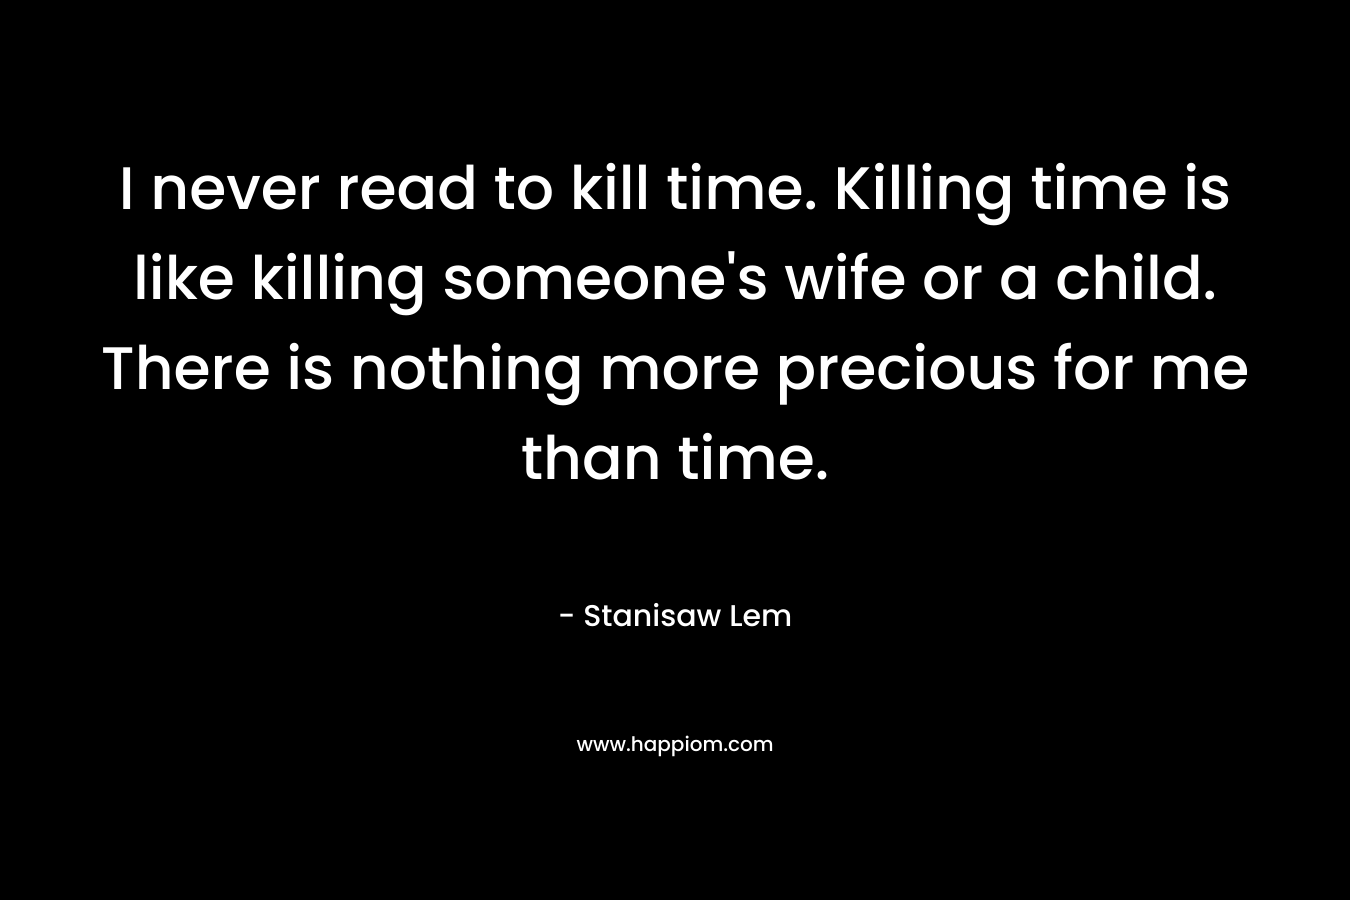 I never read to kill time. Killing time is like killing someone's wife or a child. There is nothing more precious for me than time.